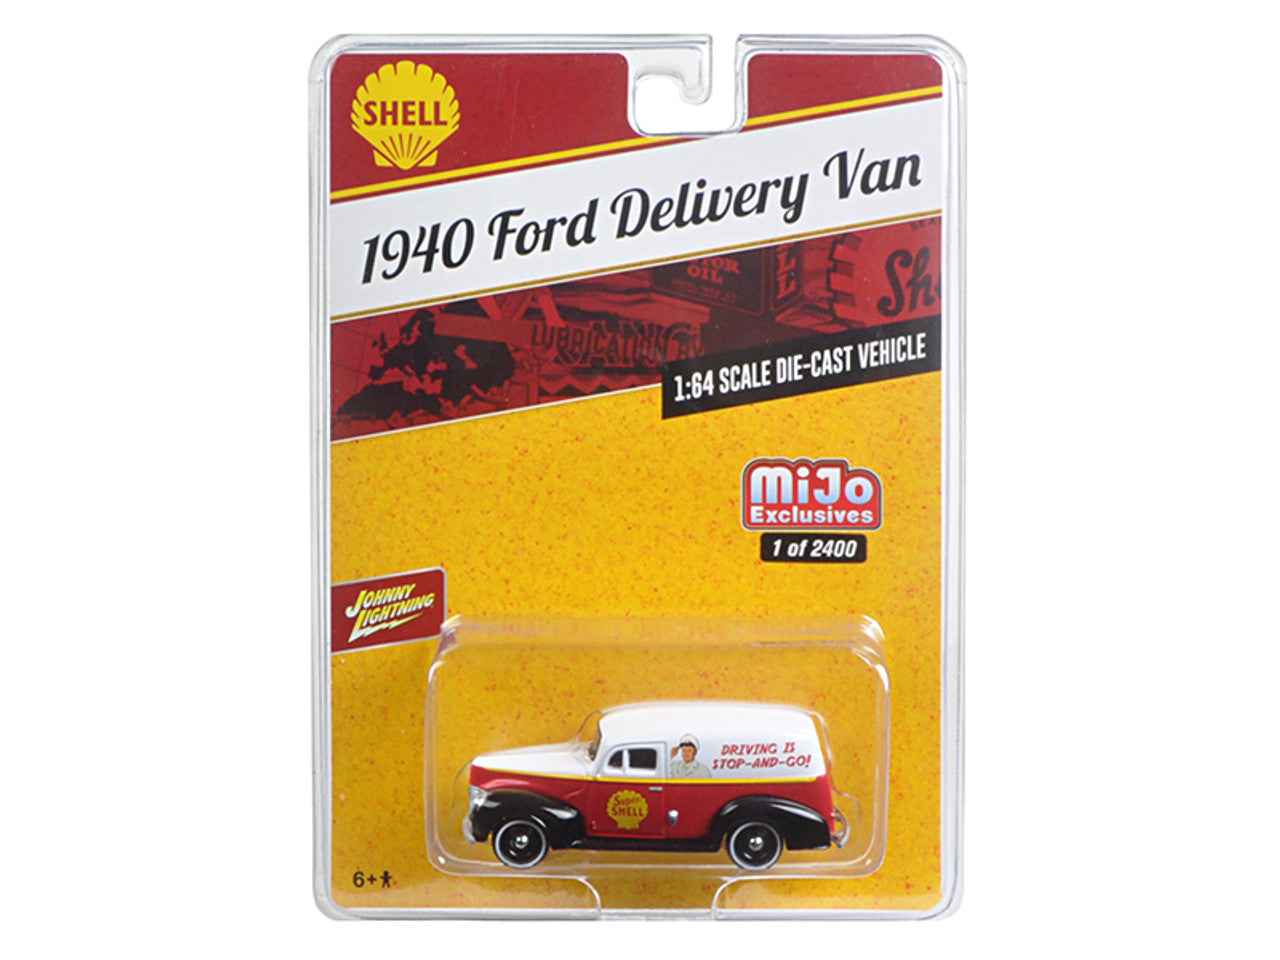 1:64 1940 Ford Delivery Van Shell Die Cast Model